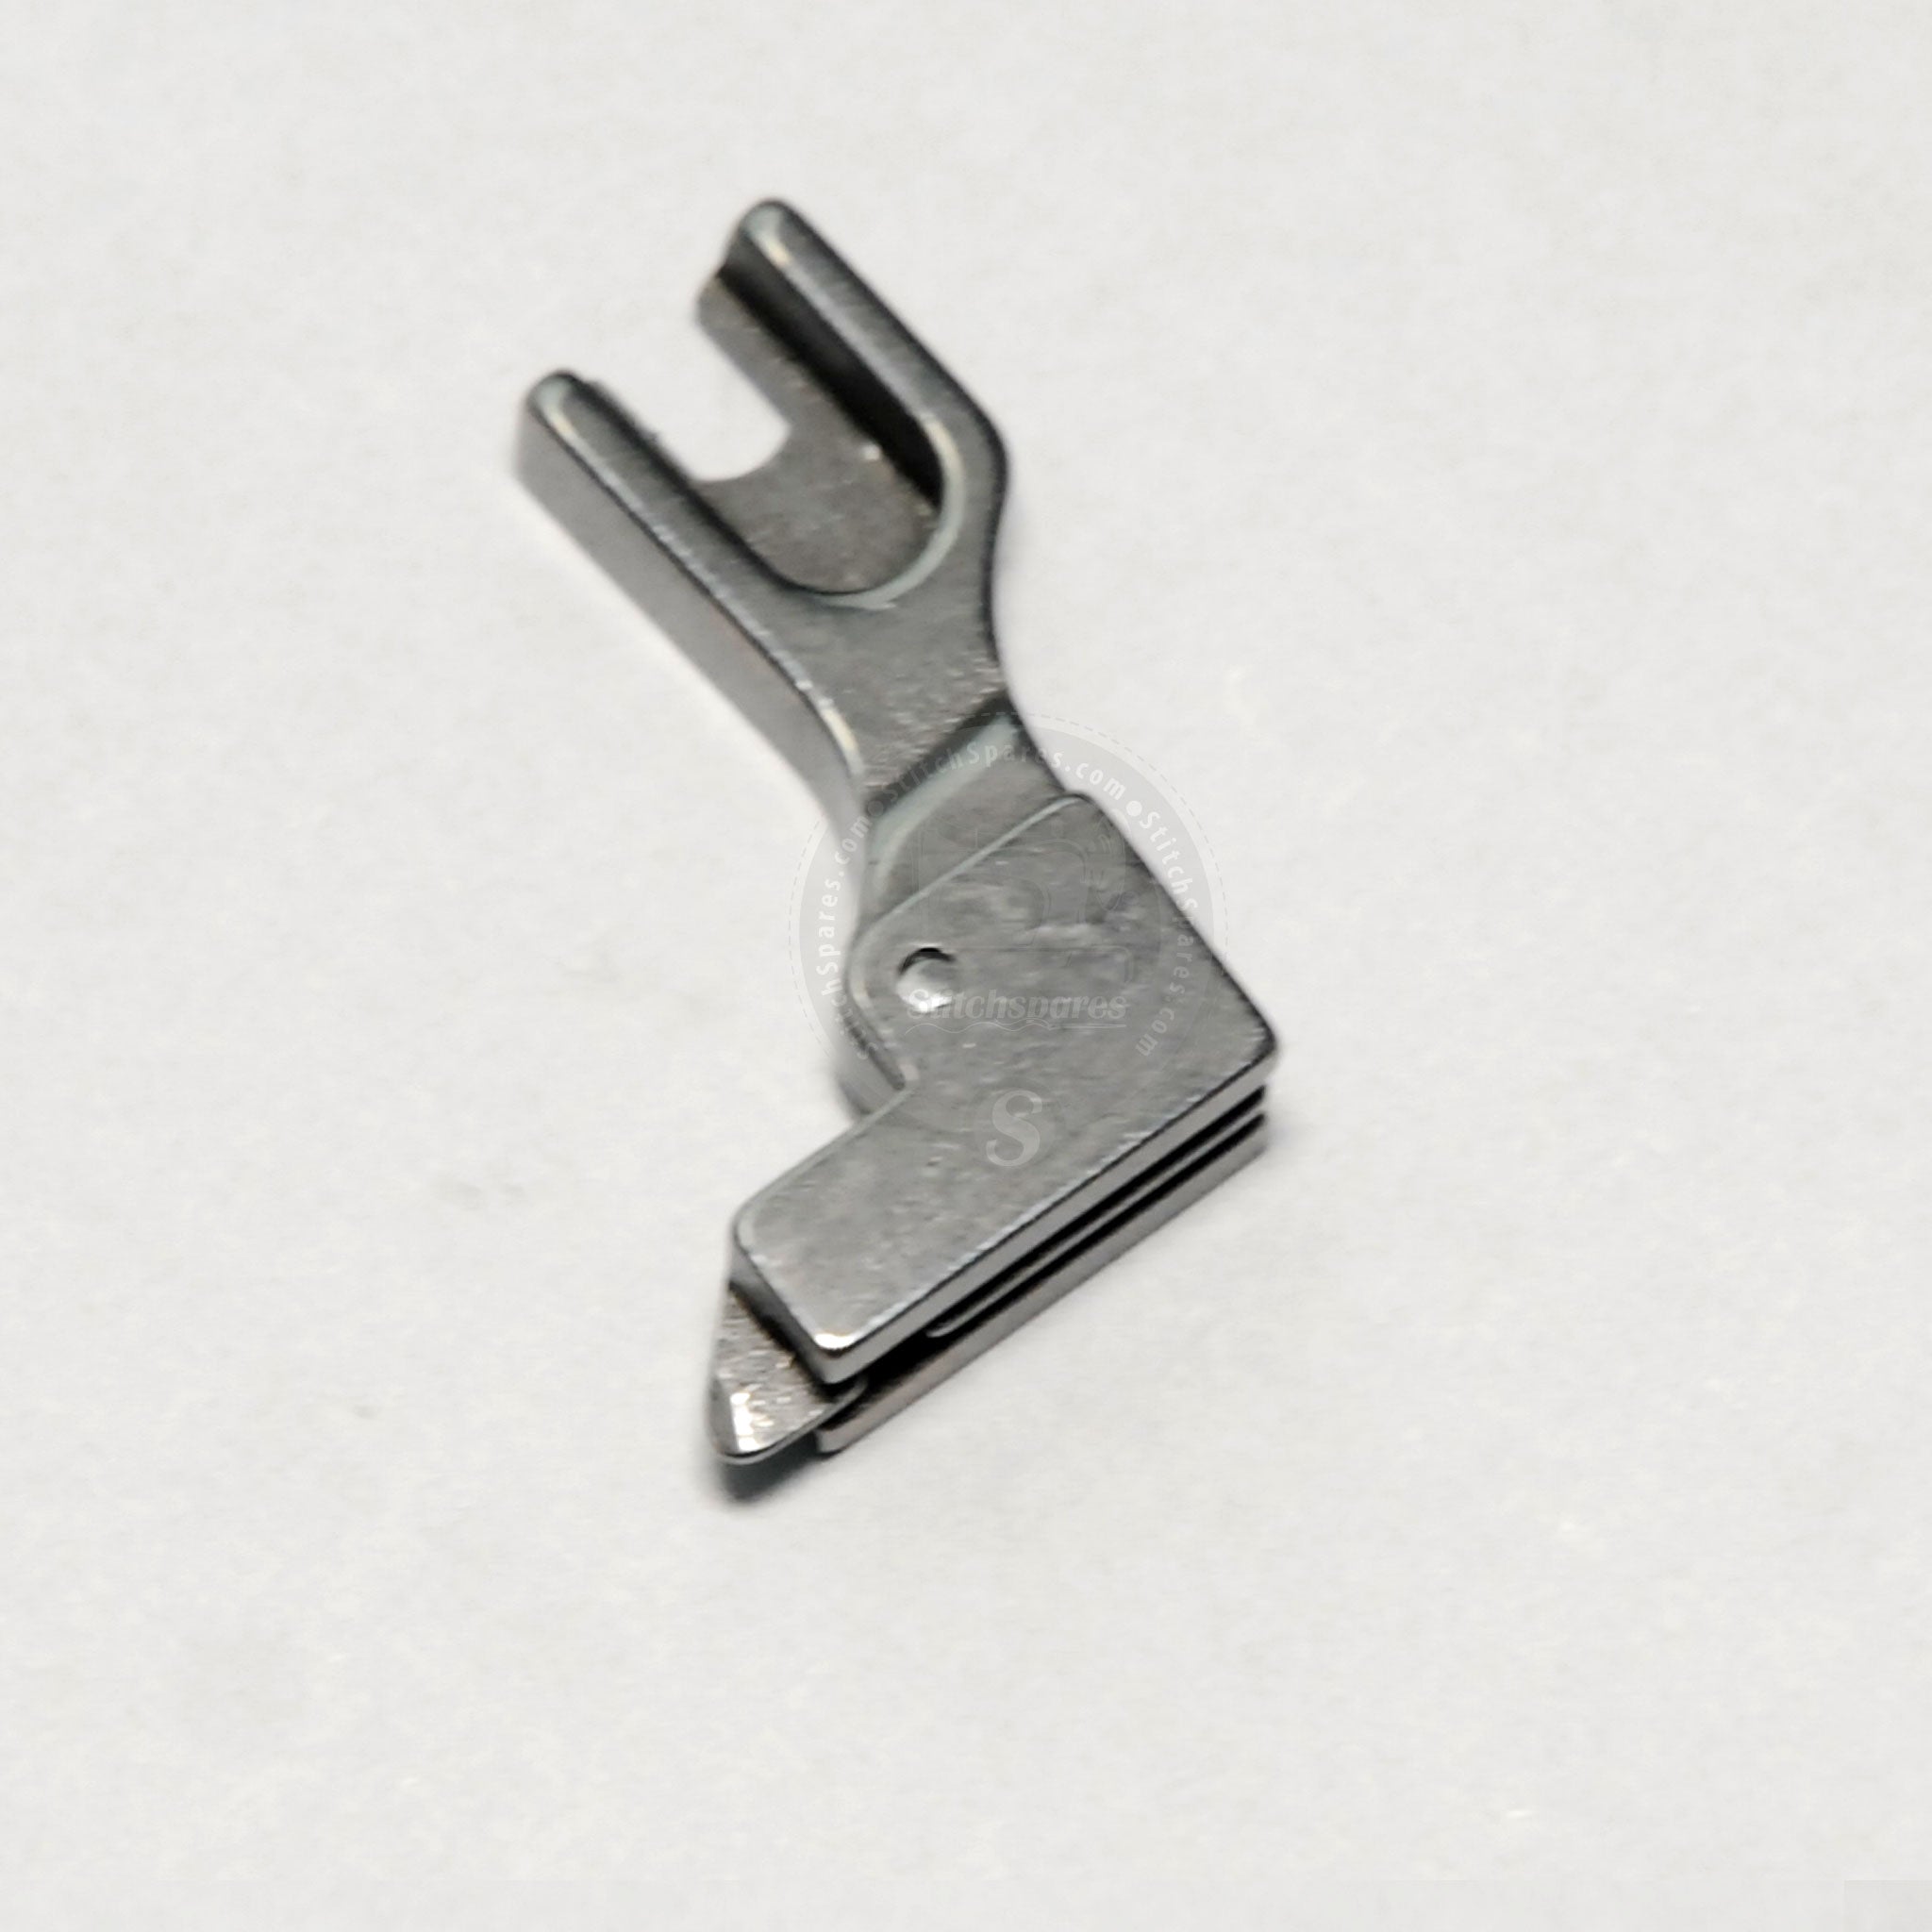 Concealed Invisible Zipper Foot for Singer Sewing Machine  Gone Sewing ~  Notions, Machine Presser Feet, Bobbins, Needles